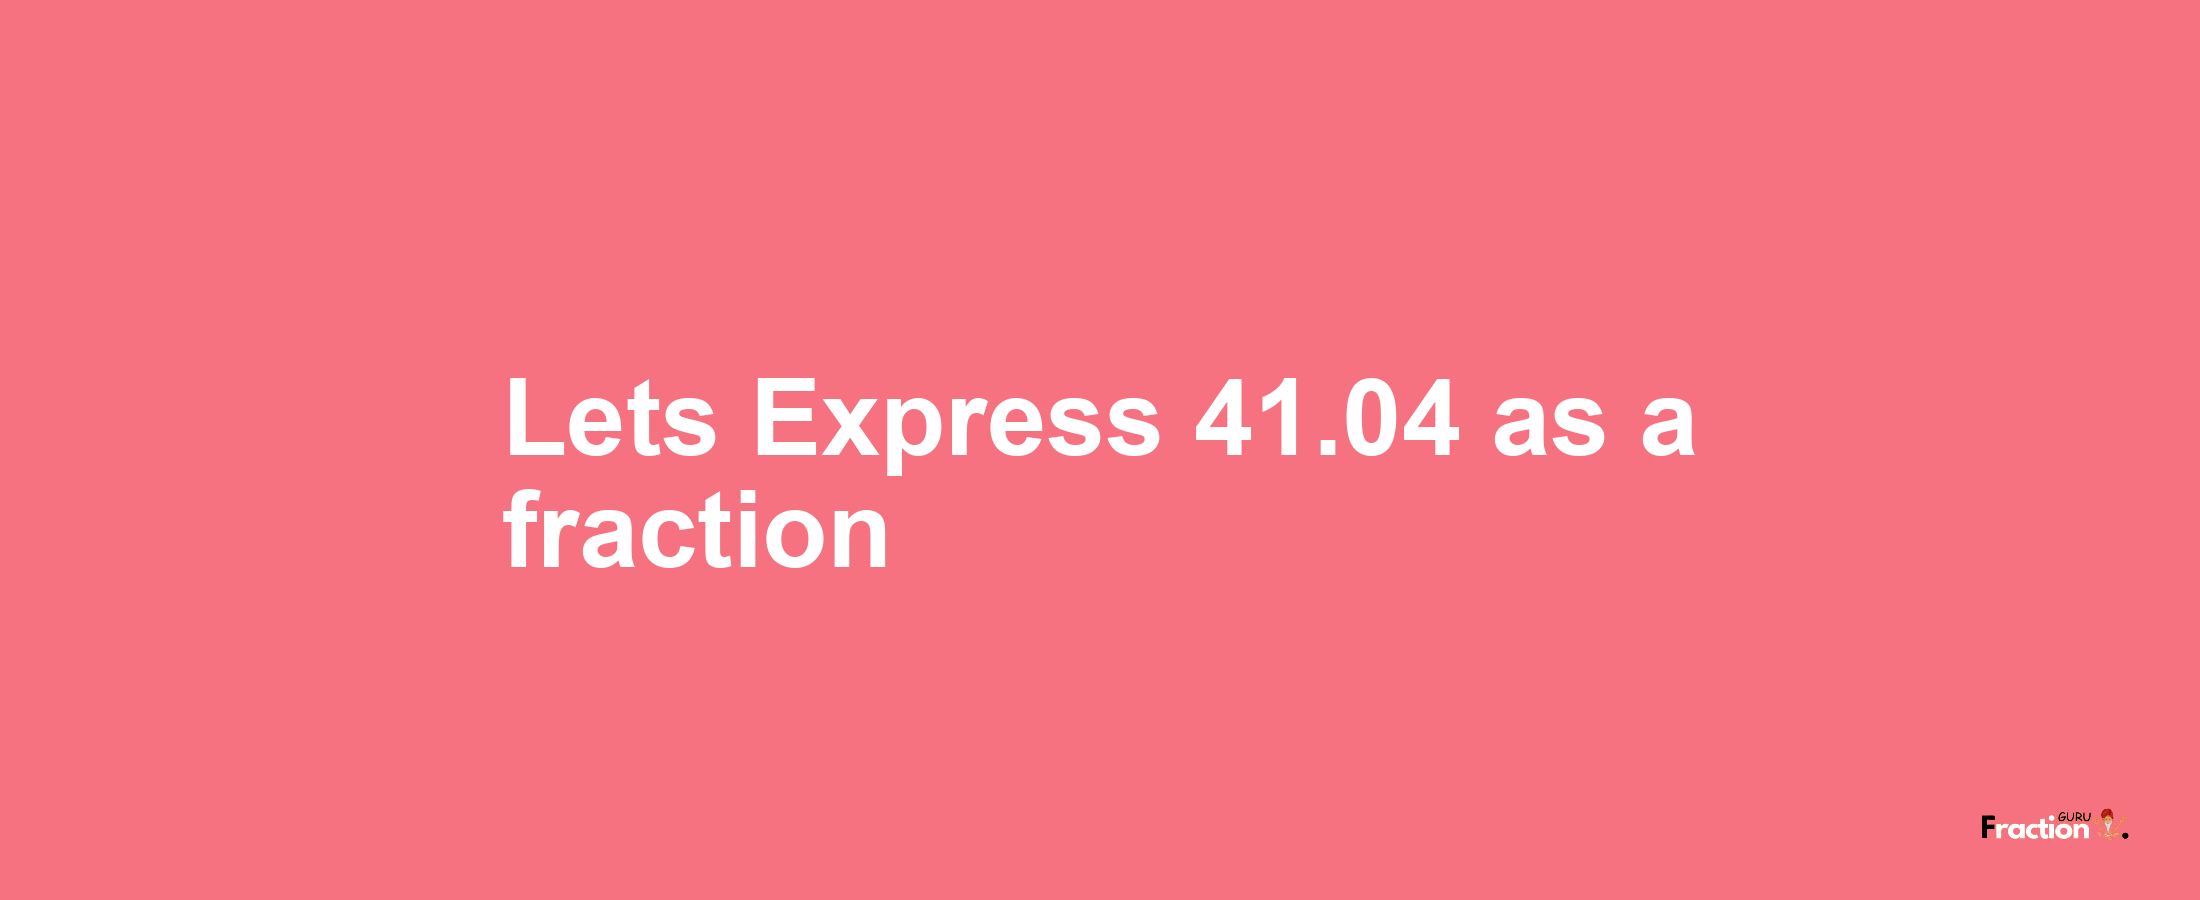 Lets Express 41.04 as afraction